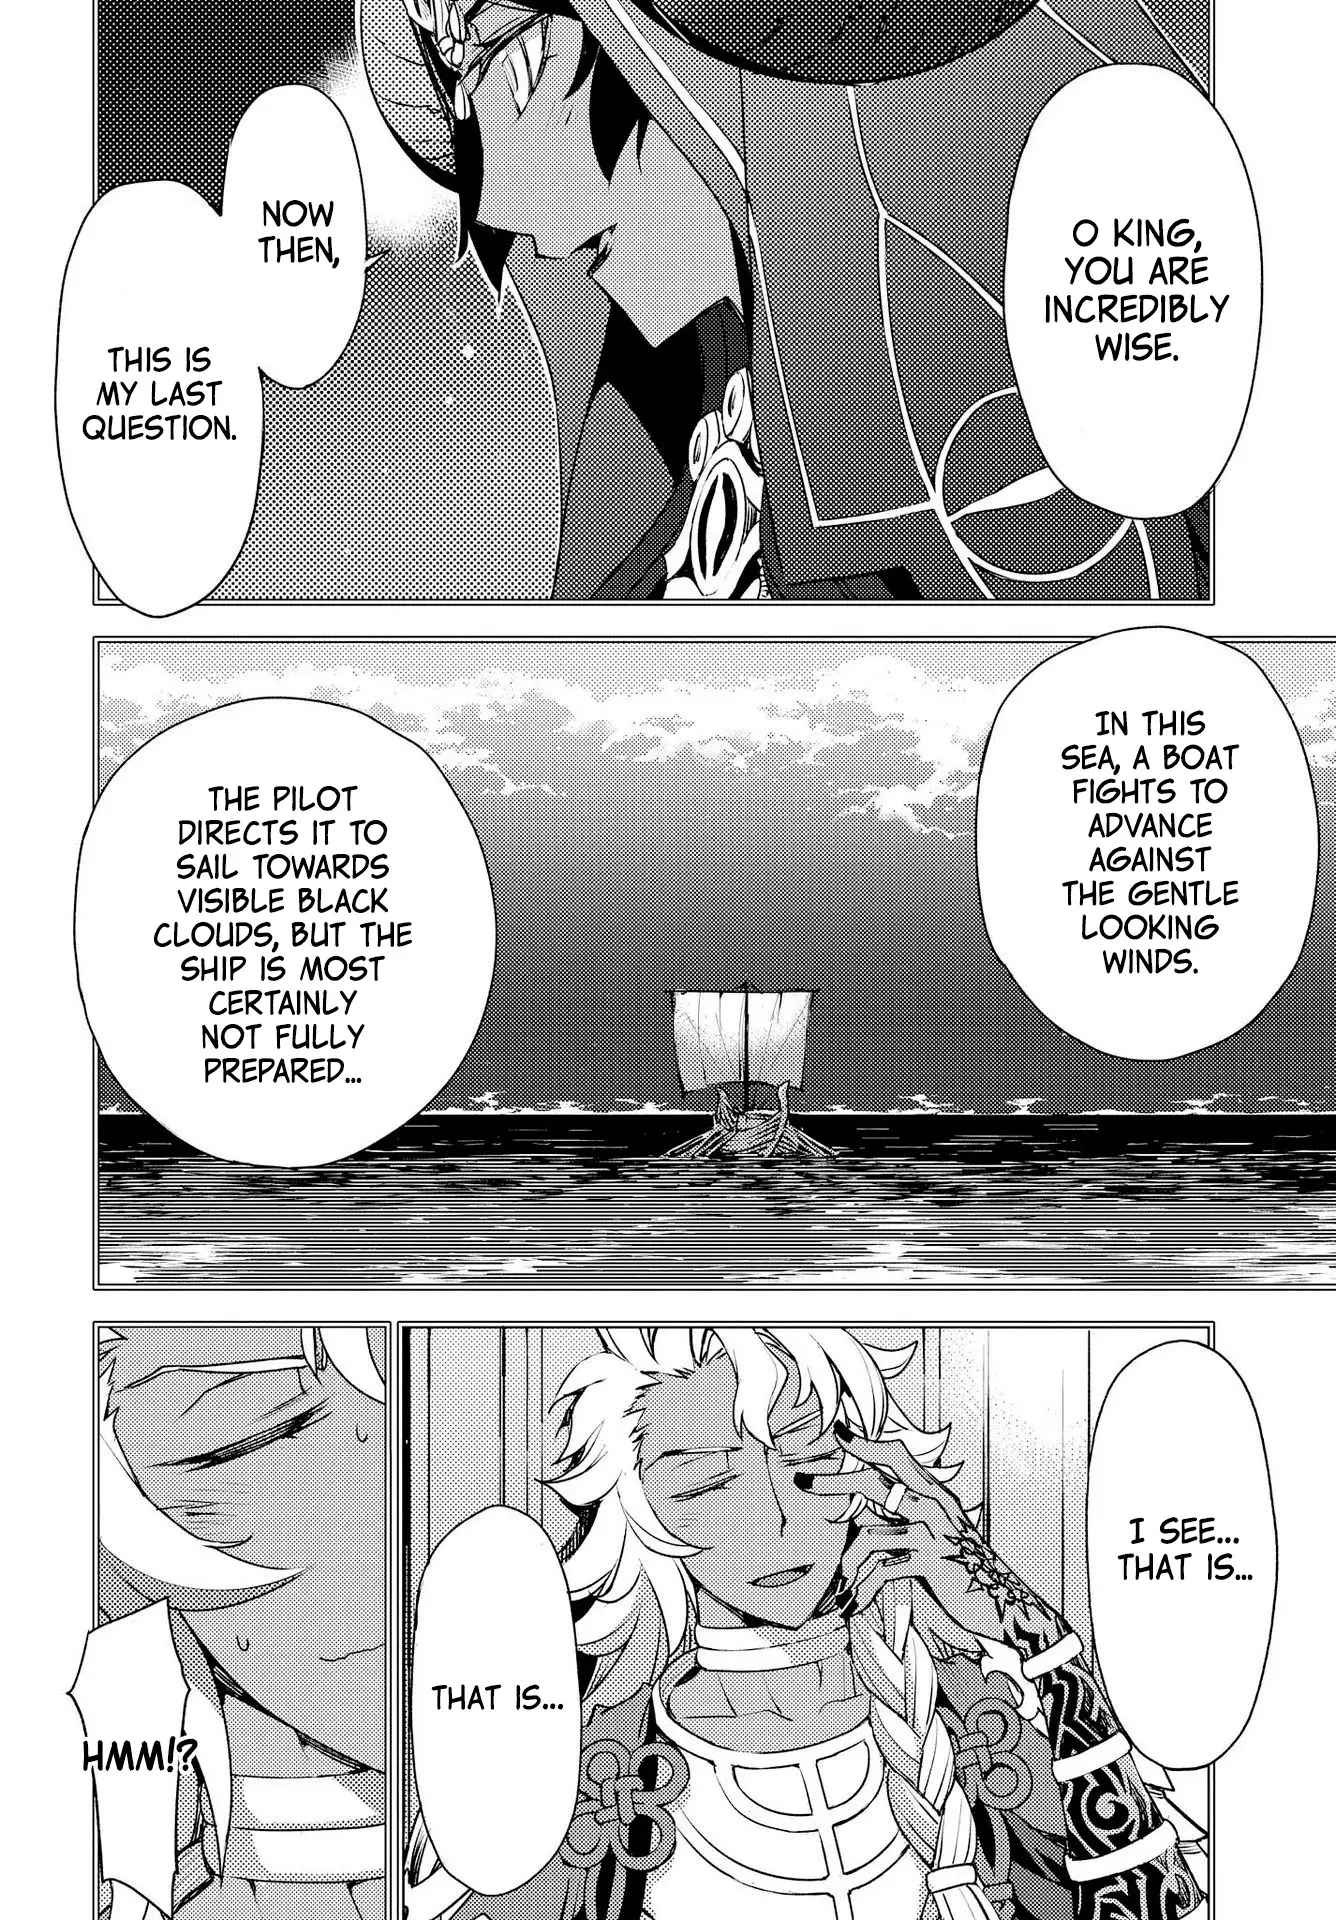 Fate/grand Order: Epic Of Remnant - Subspecies Singularity Iv: Taboo Advent Salem: Salem Of Heresy - 7 page 7